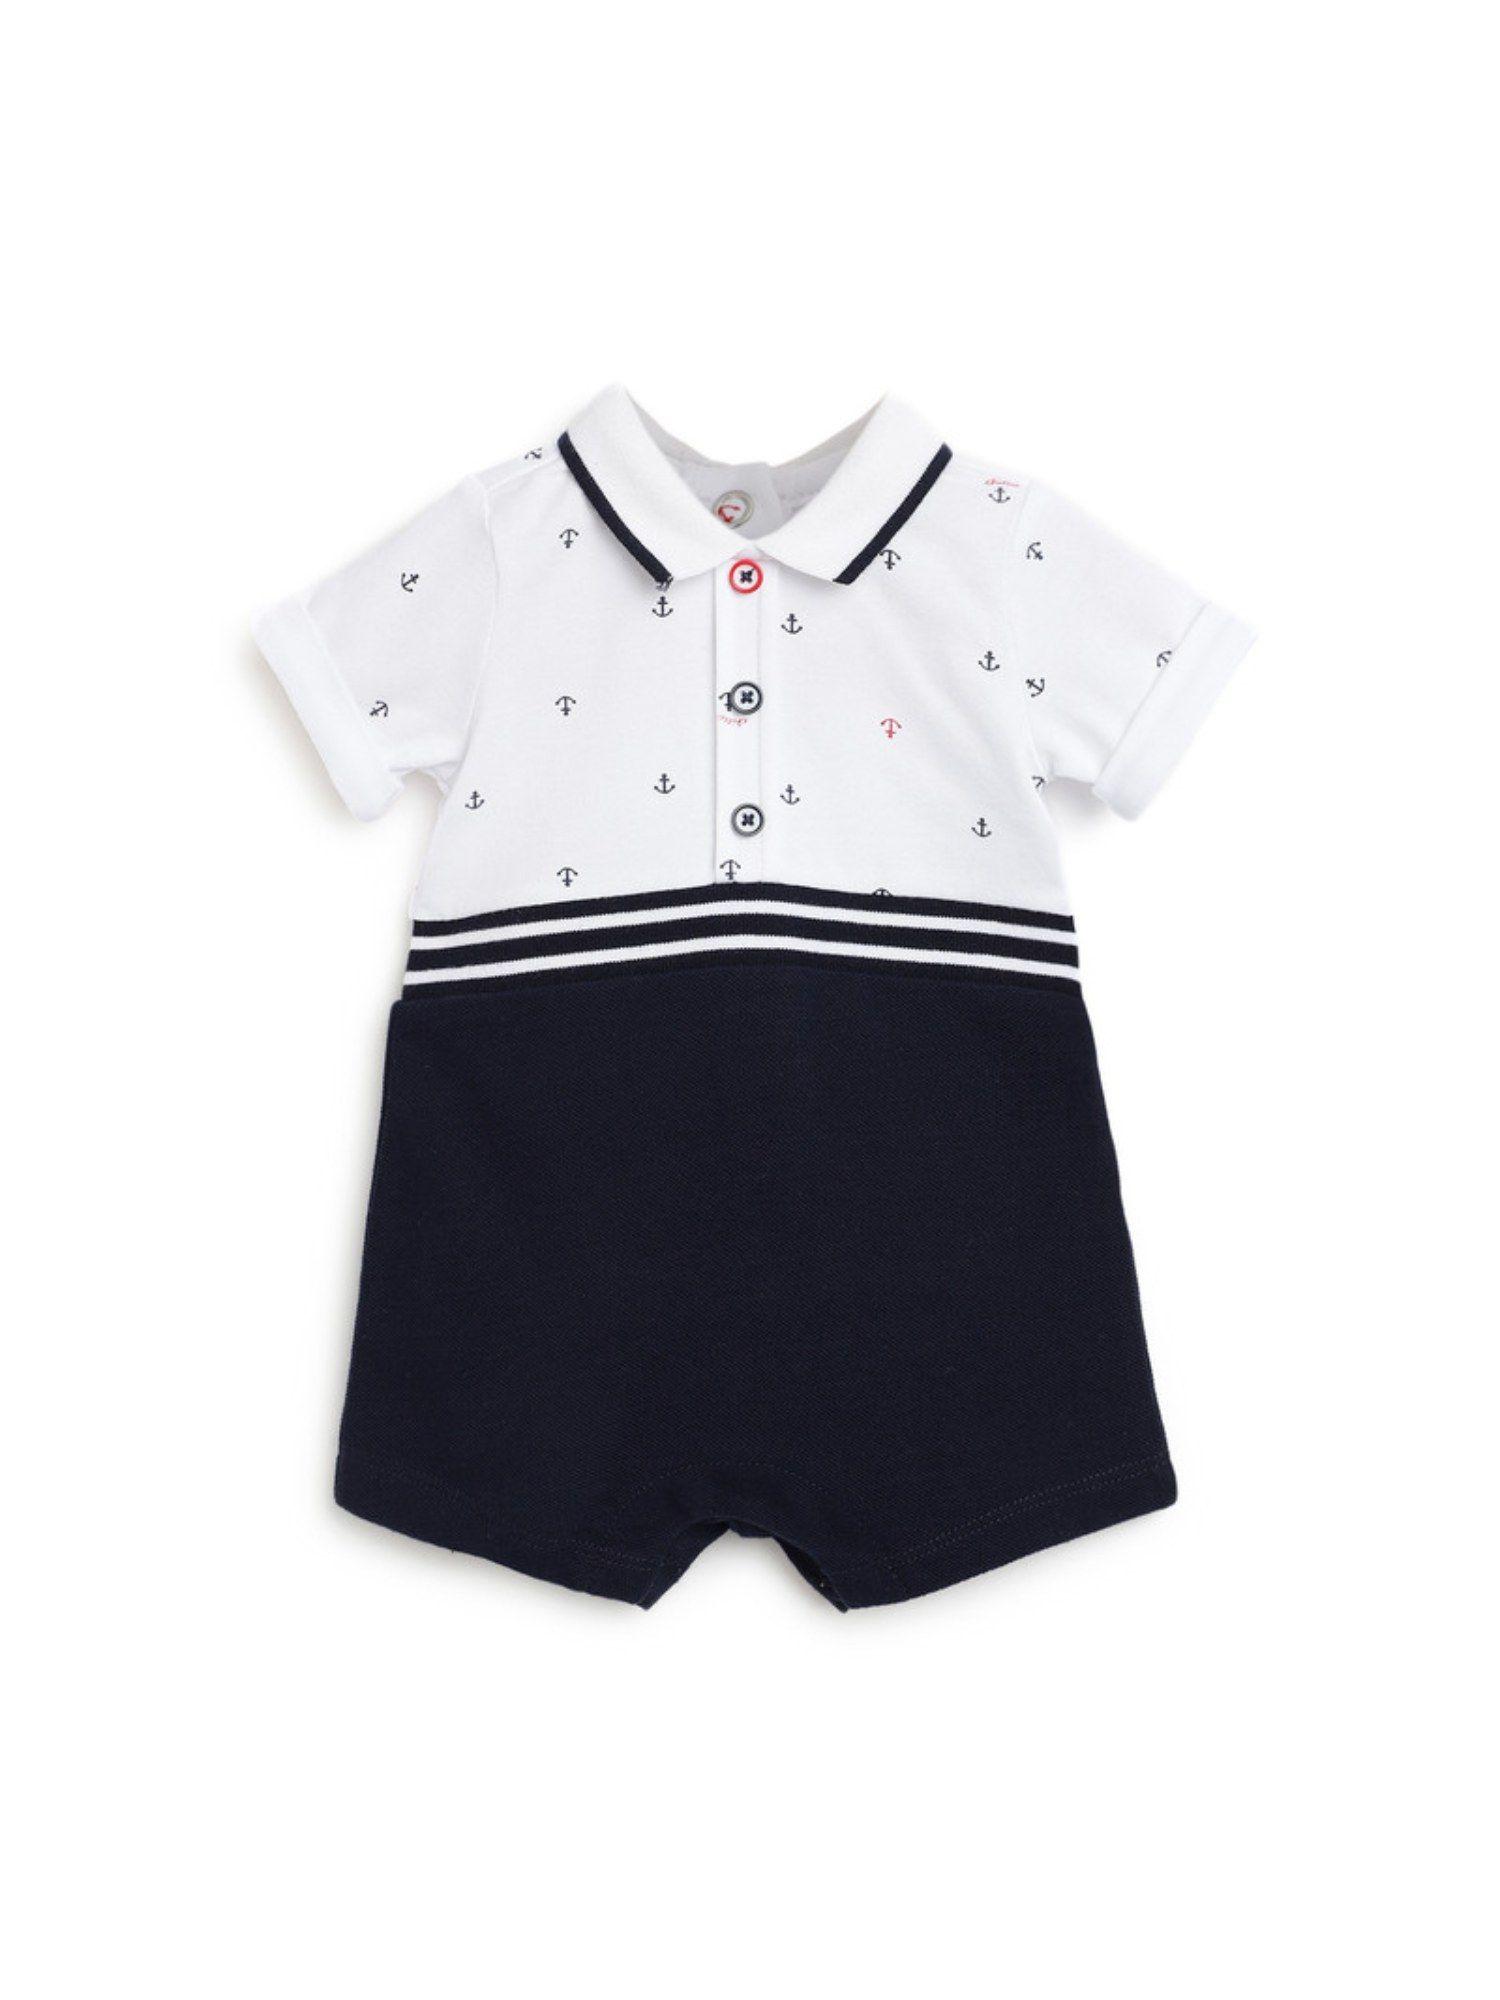 boys-white-&-blue-printed-knitted-romper